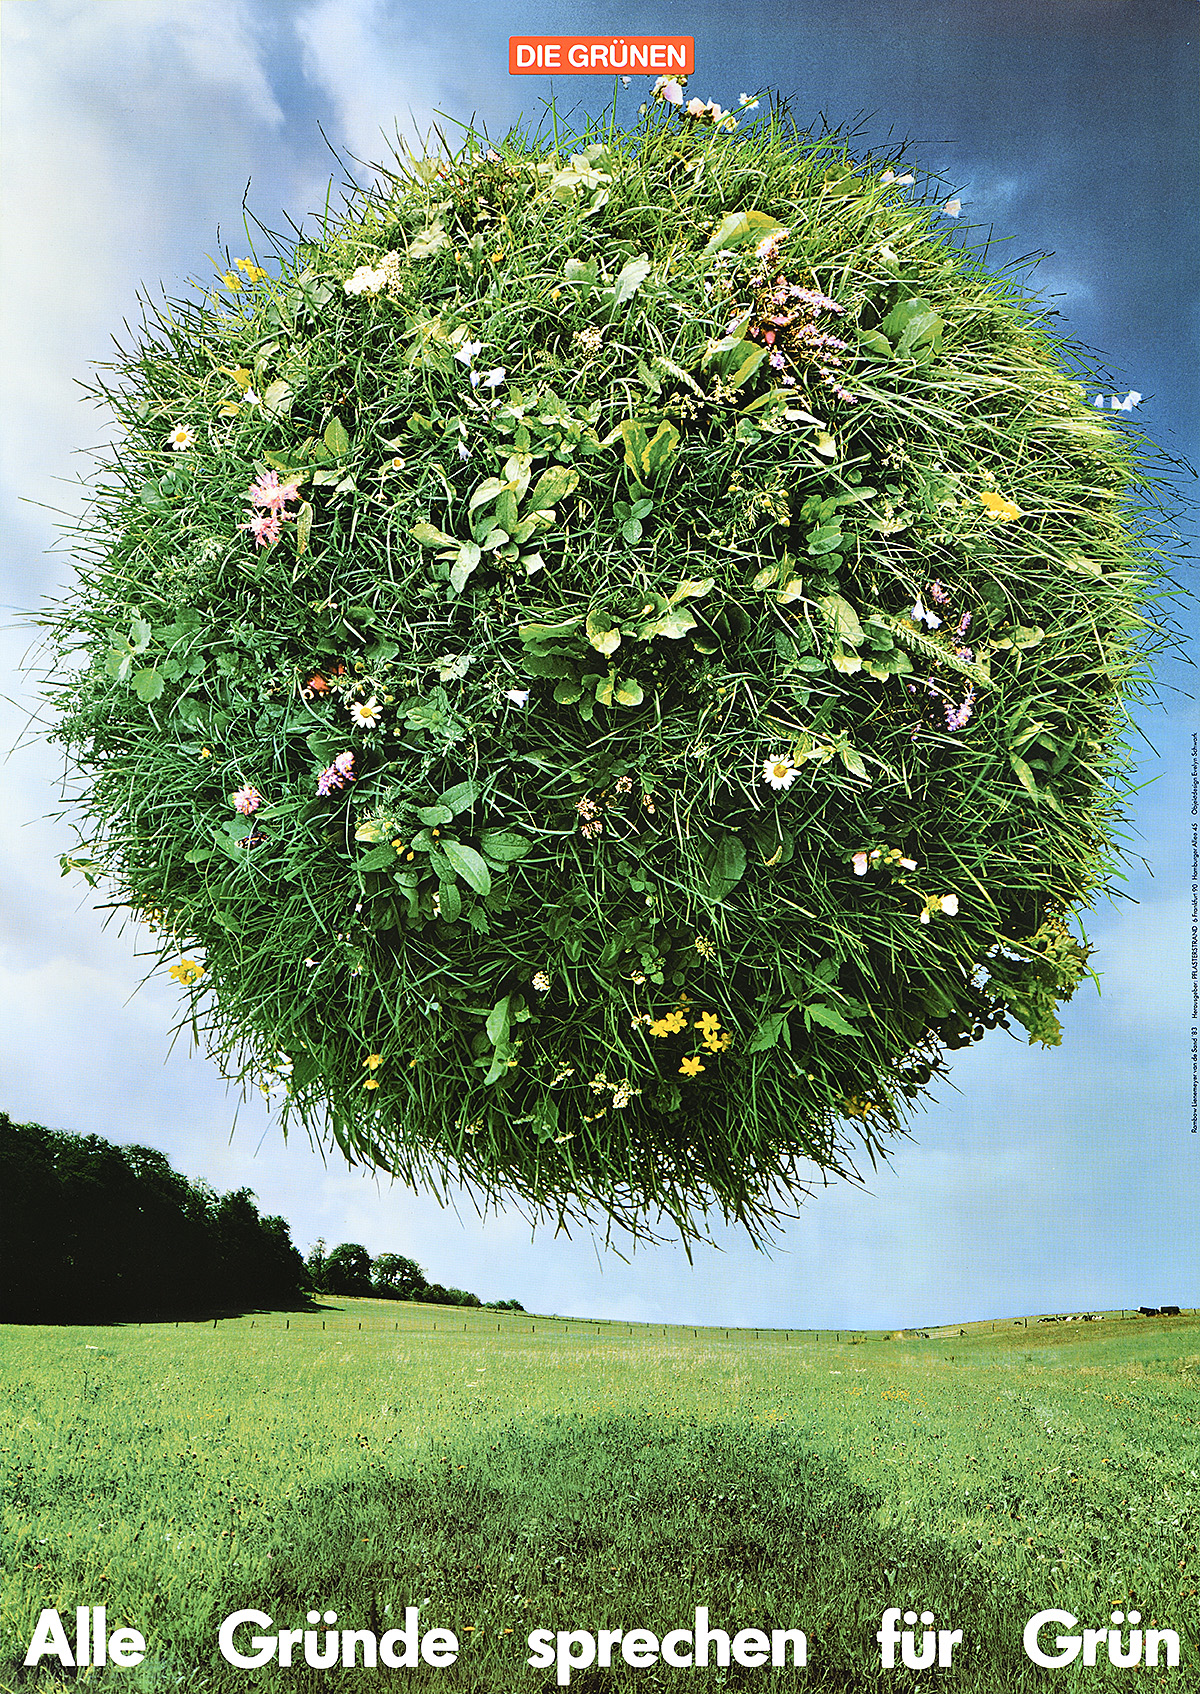 A poster of a ball covered in plants, grass, and flowers floating over a green field.